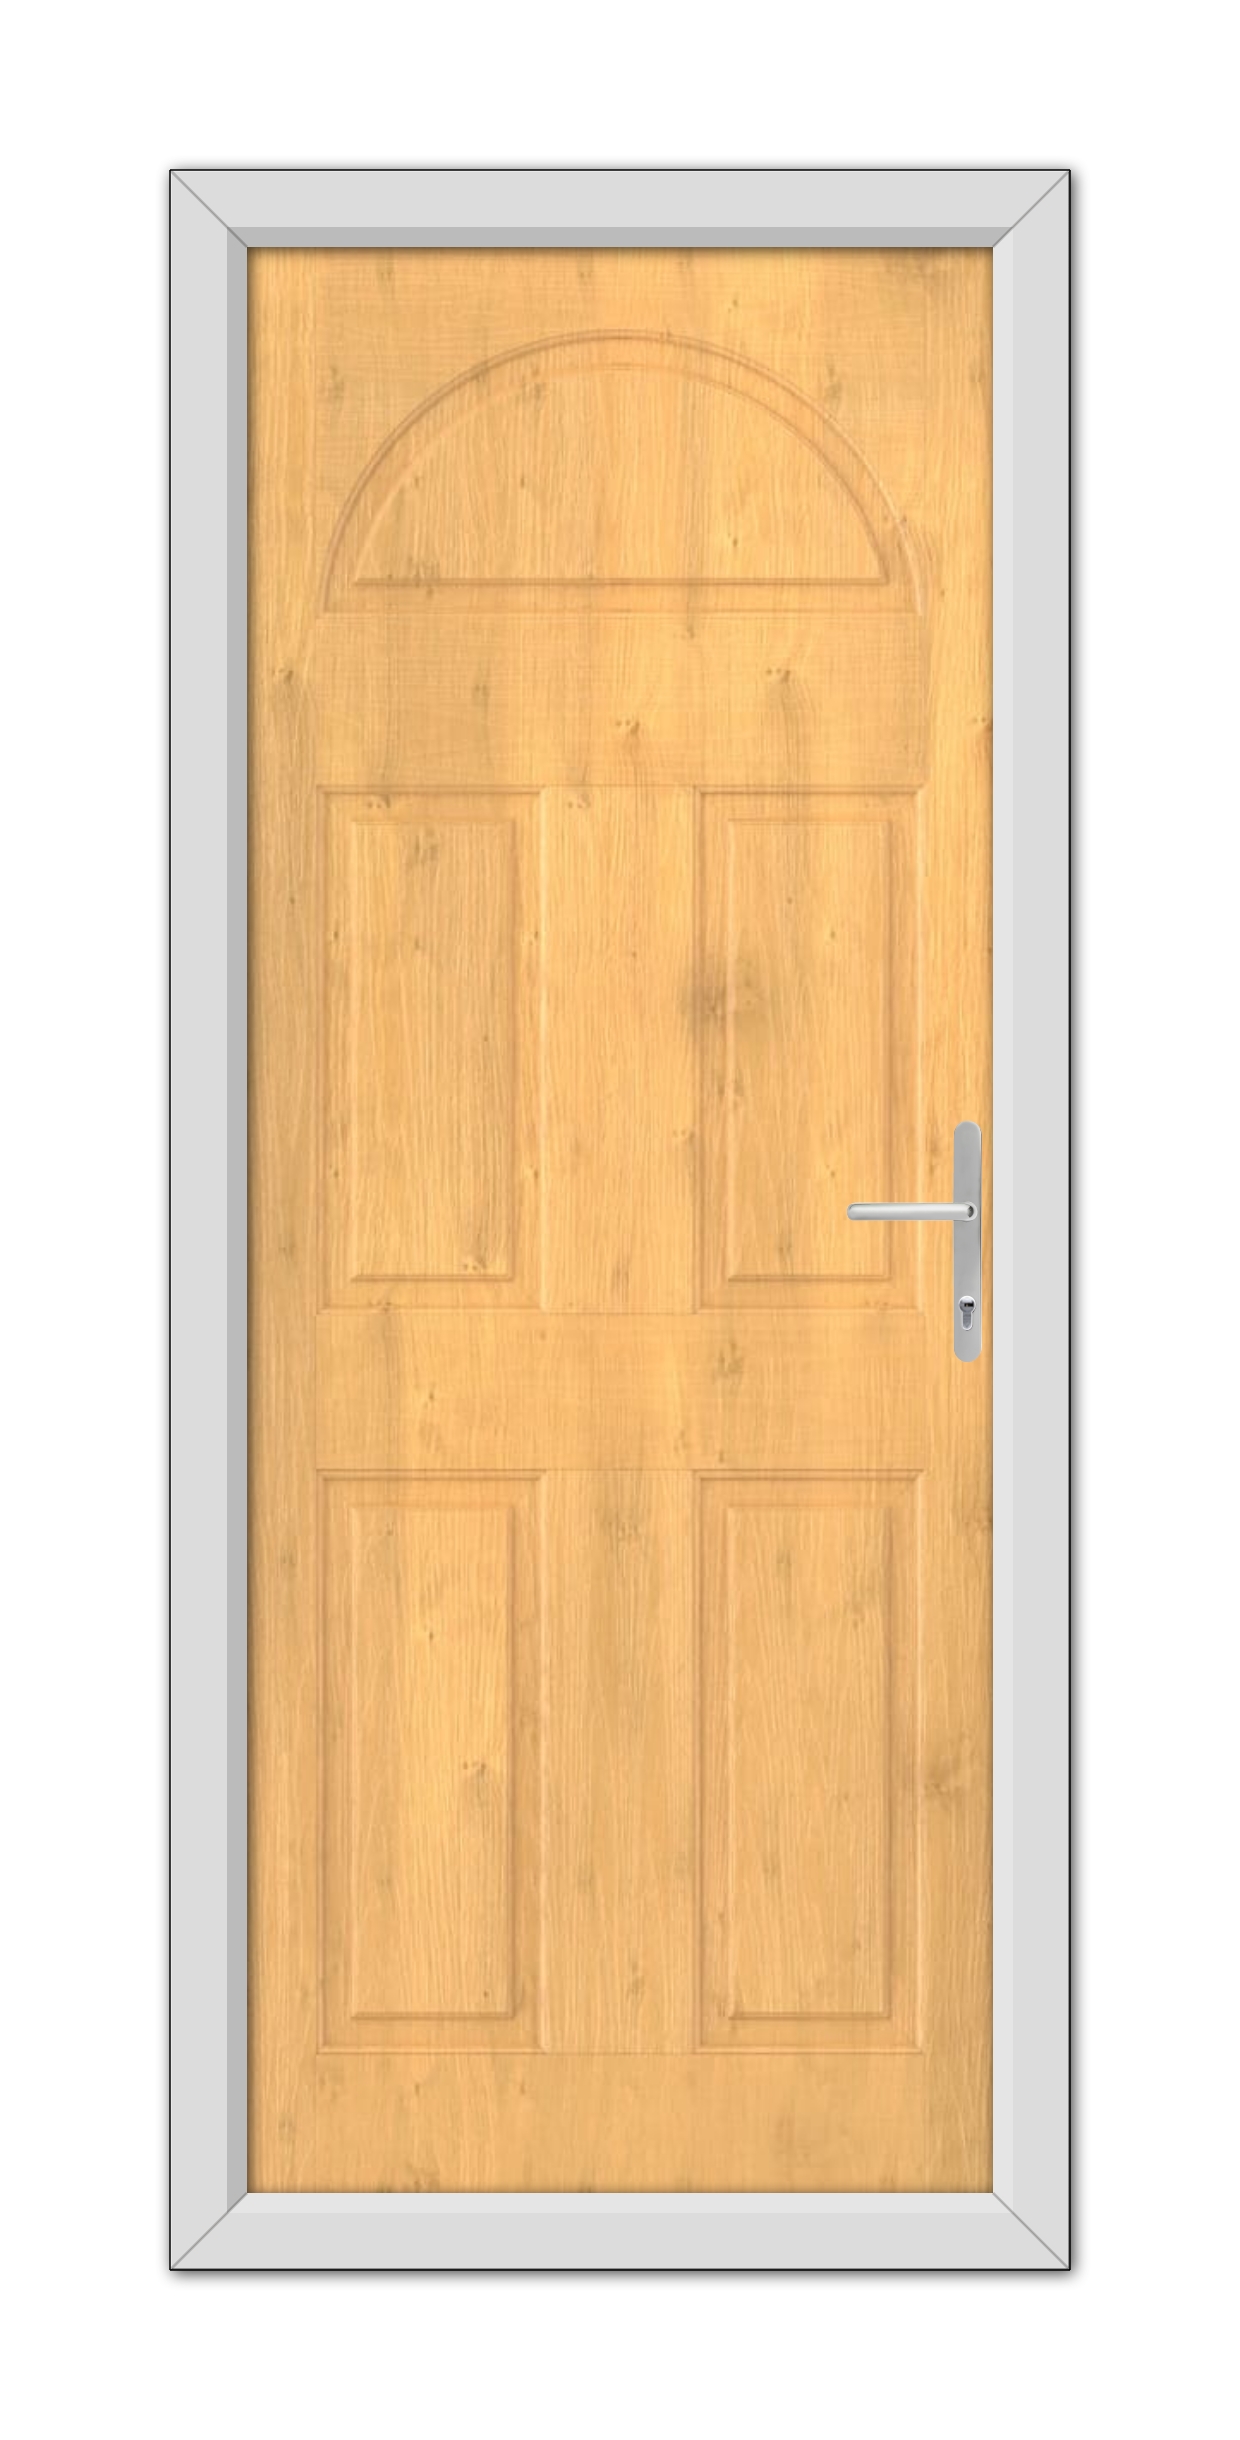 A Irish Oak Middleton Solid Stable Composite Door 48mm Timber Core with a metal handle, framed by a simple gray trim, viewed head-on.